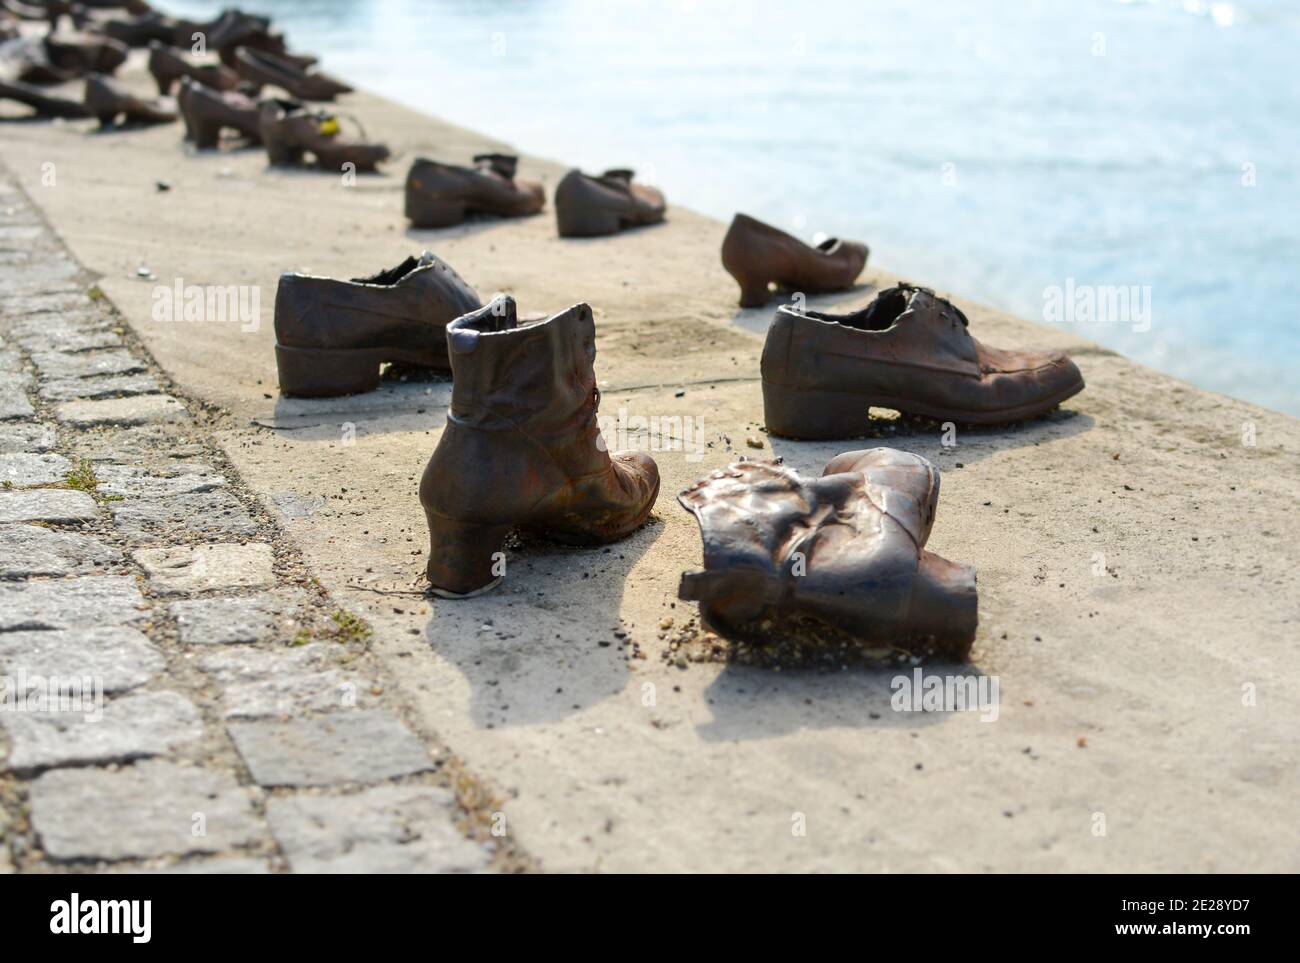 The shoes on the banks of the Danube river monument to the victims of Nazi repression erected on April 16 2005 in Budapest Hungary Stock Photo